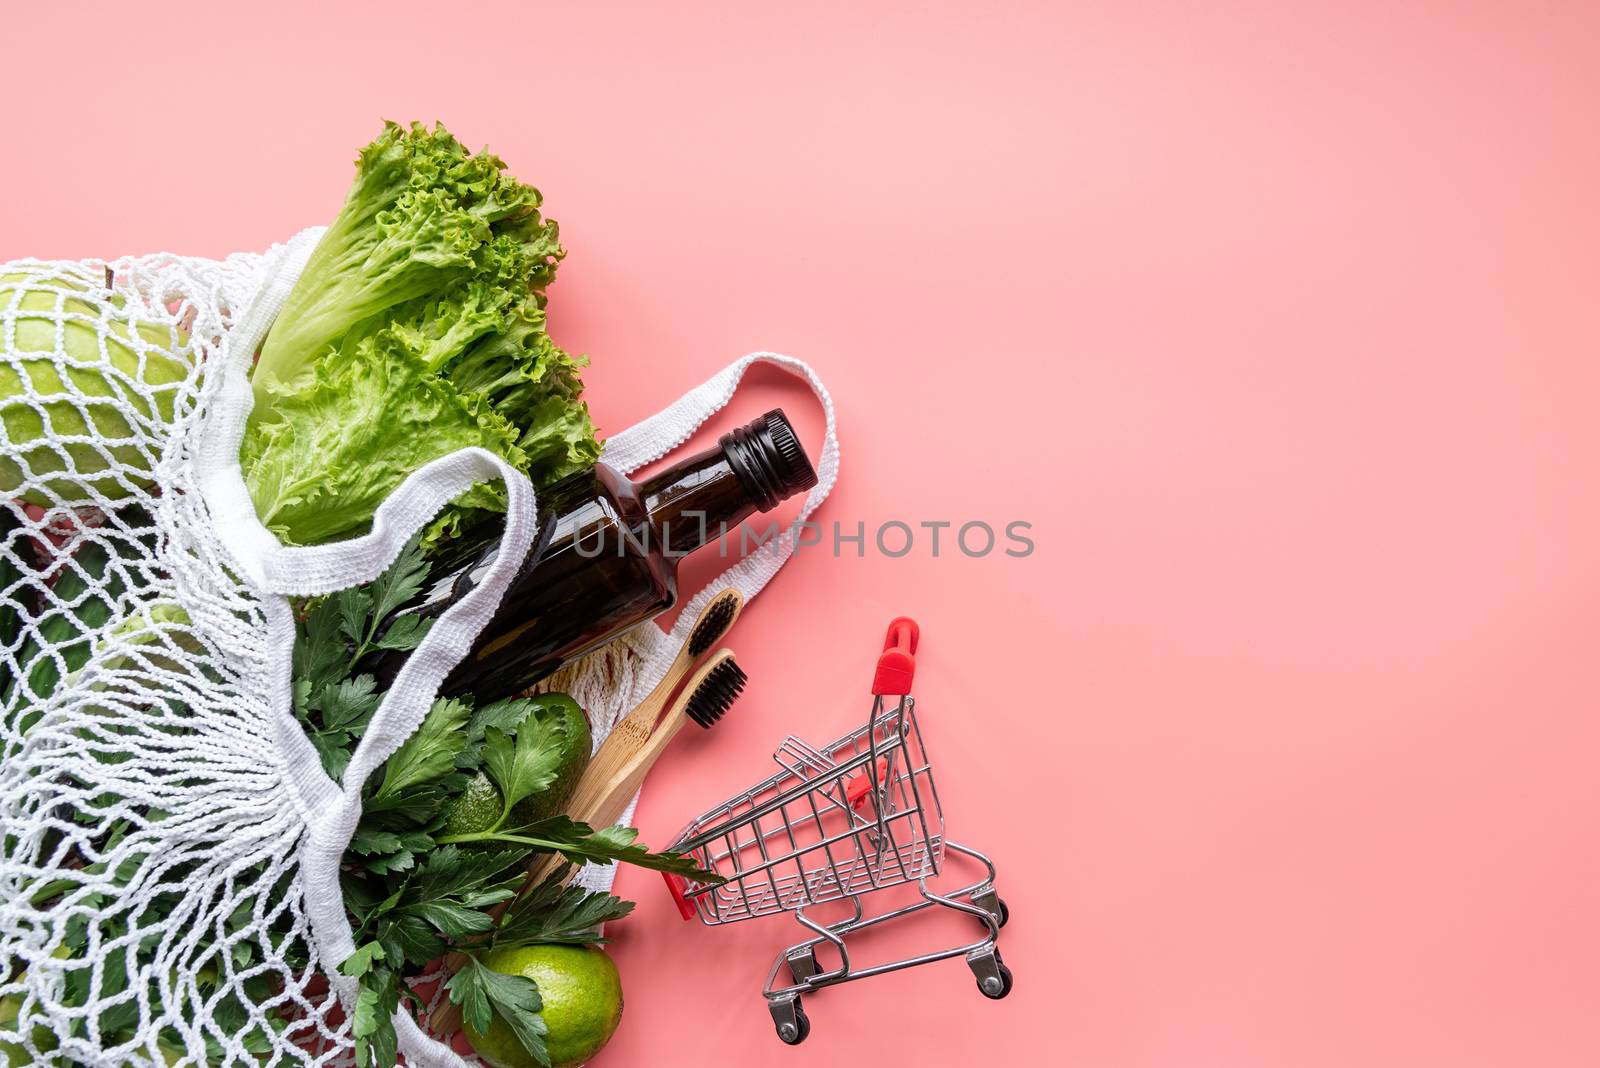 Coronavirus food supplies concept. Eco friendly mesh bag with green vegetables, wooden toothbrushes, gloves and olive oil top view on pink background with copy space